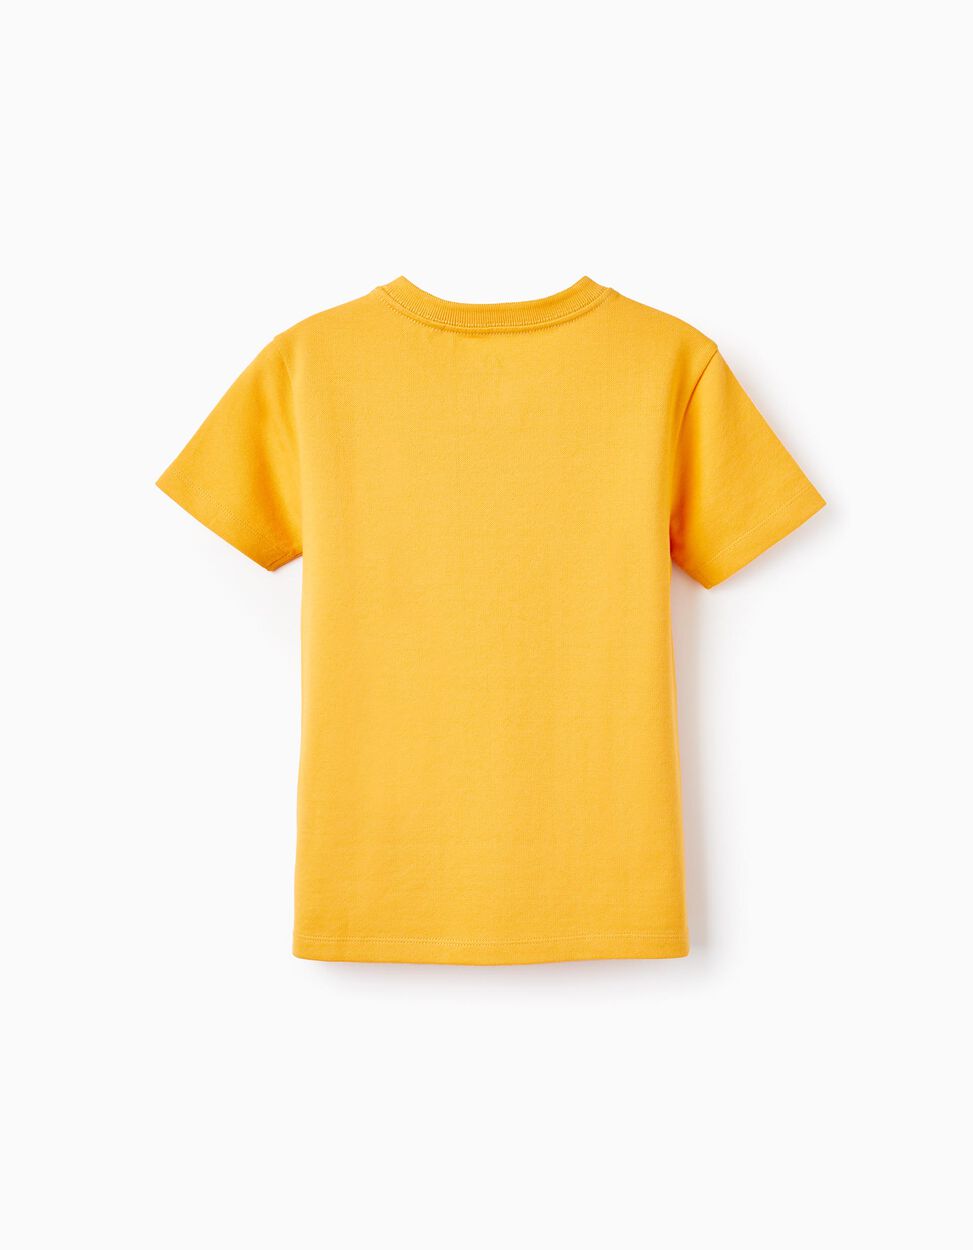 Buy Online Short-Sleeved T-Shirt in Cotton Piqué for Boys, Yellow